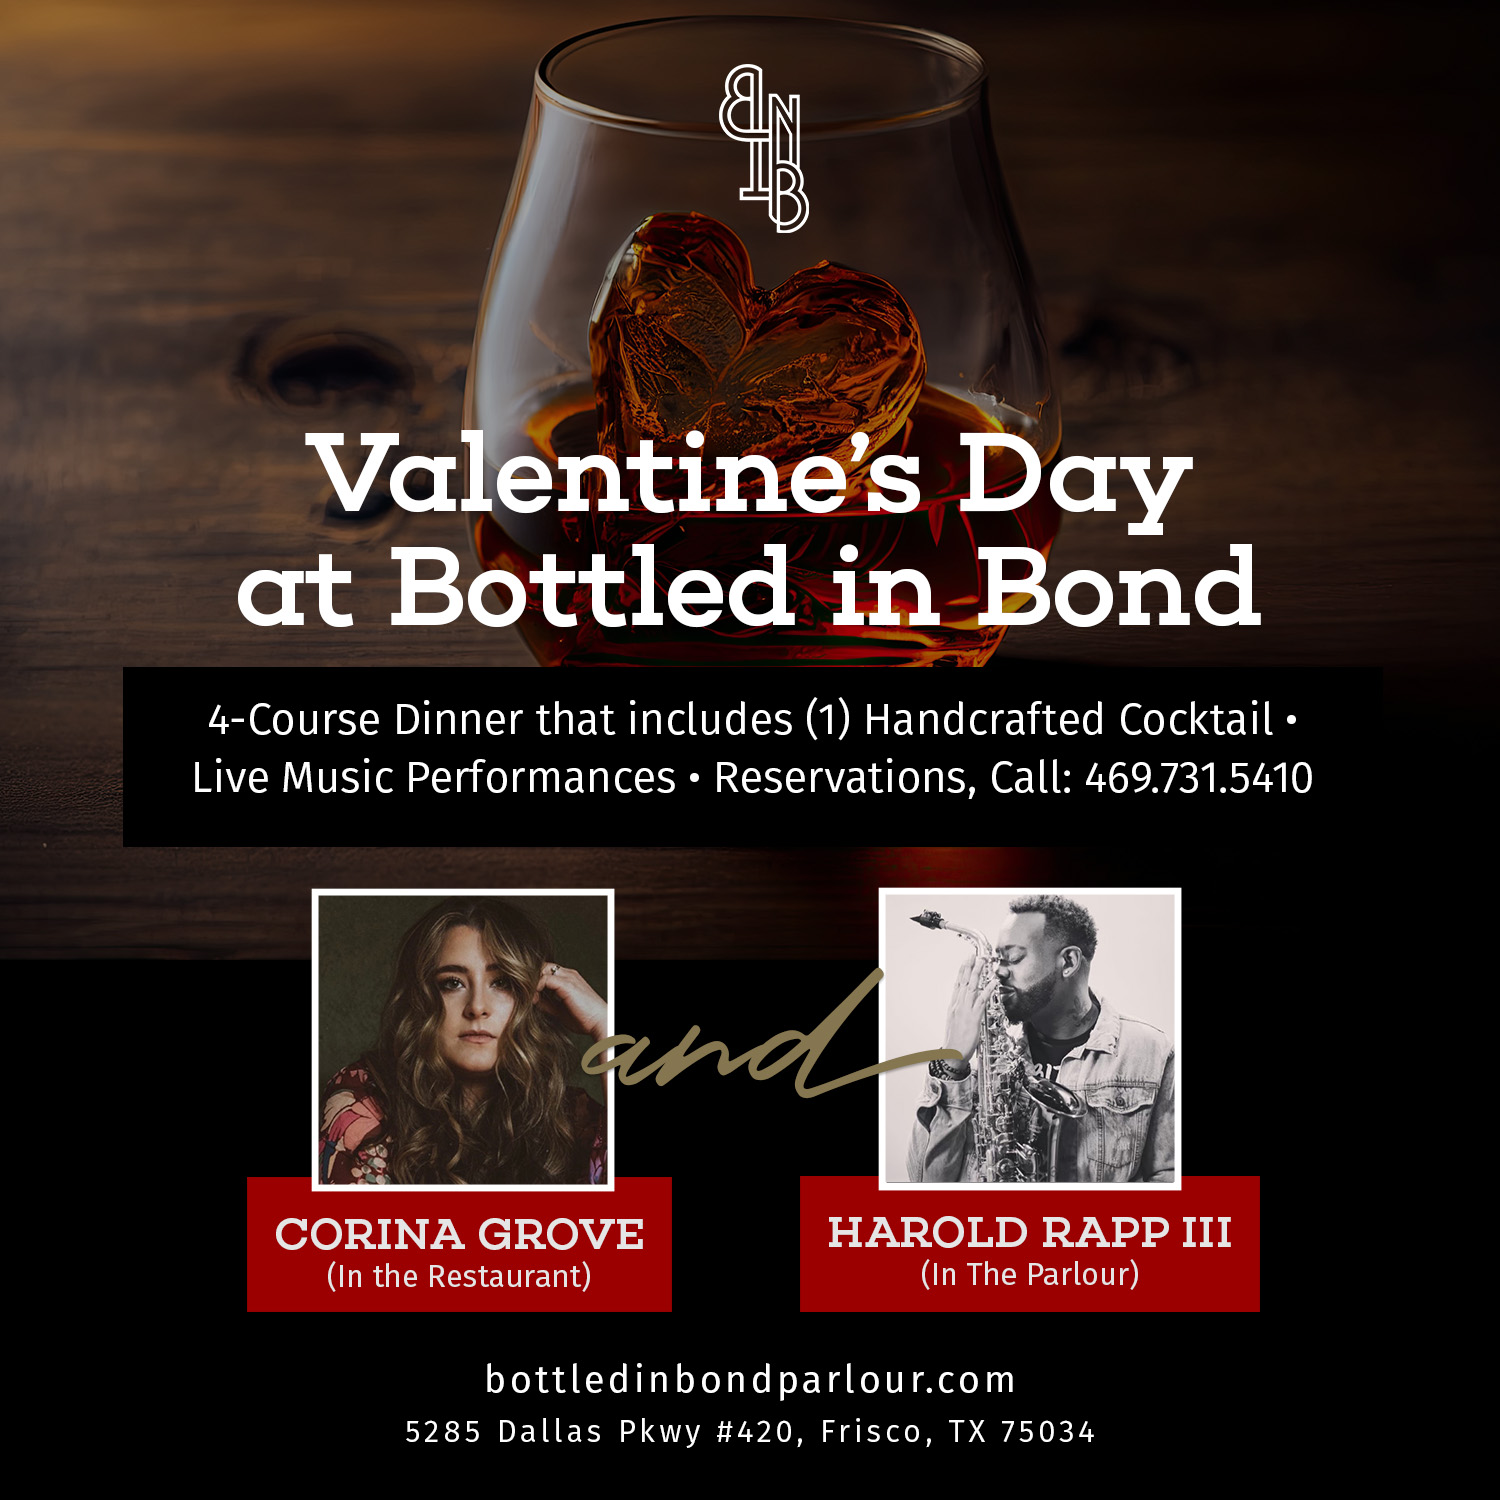 Valentine's Day at Bottled in Bond featuring Corina Grove and Harold Ramp III.